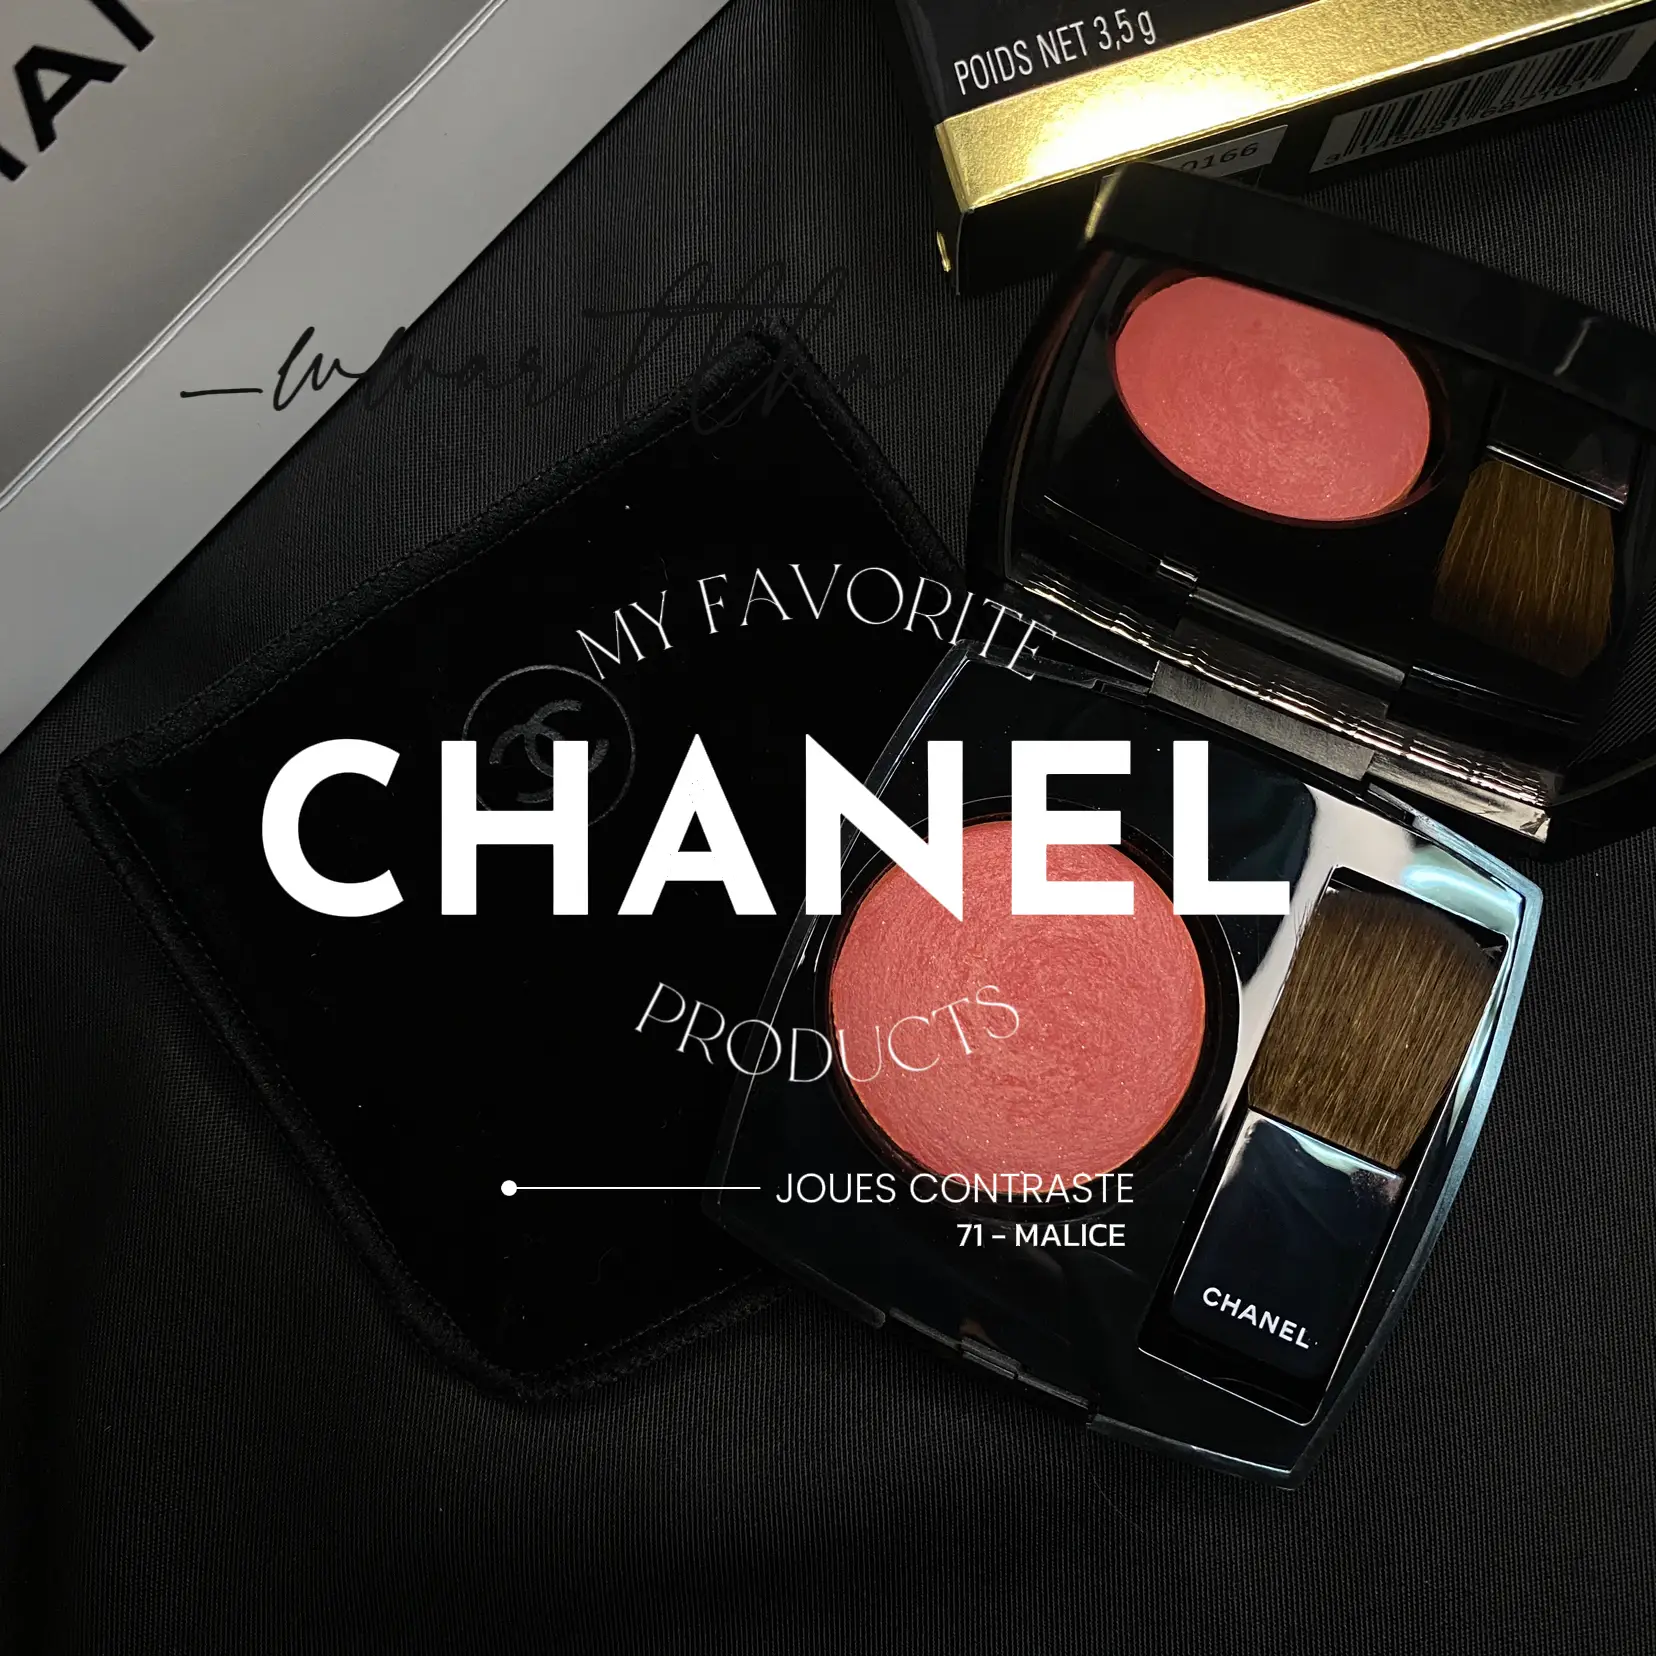 CHANEL Joues Contraste Powder Blush (All Shades) - Reviews